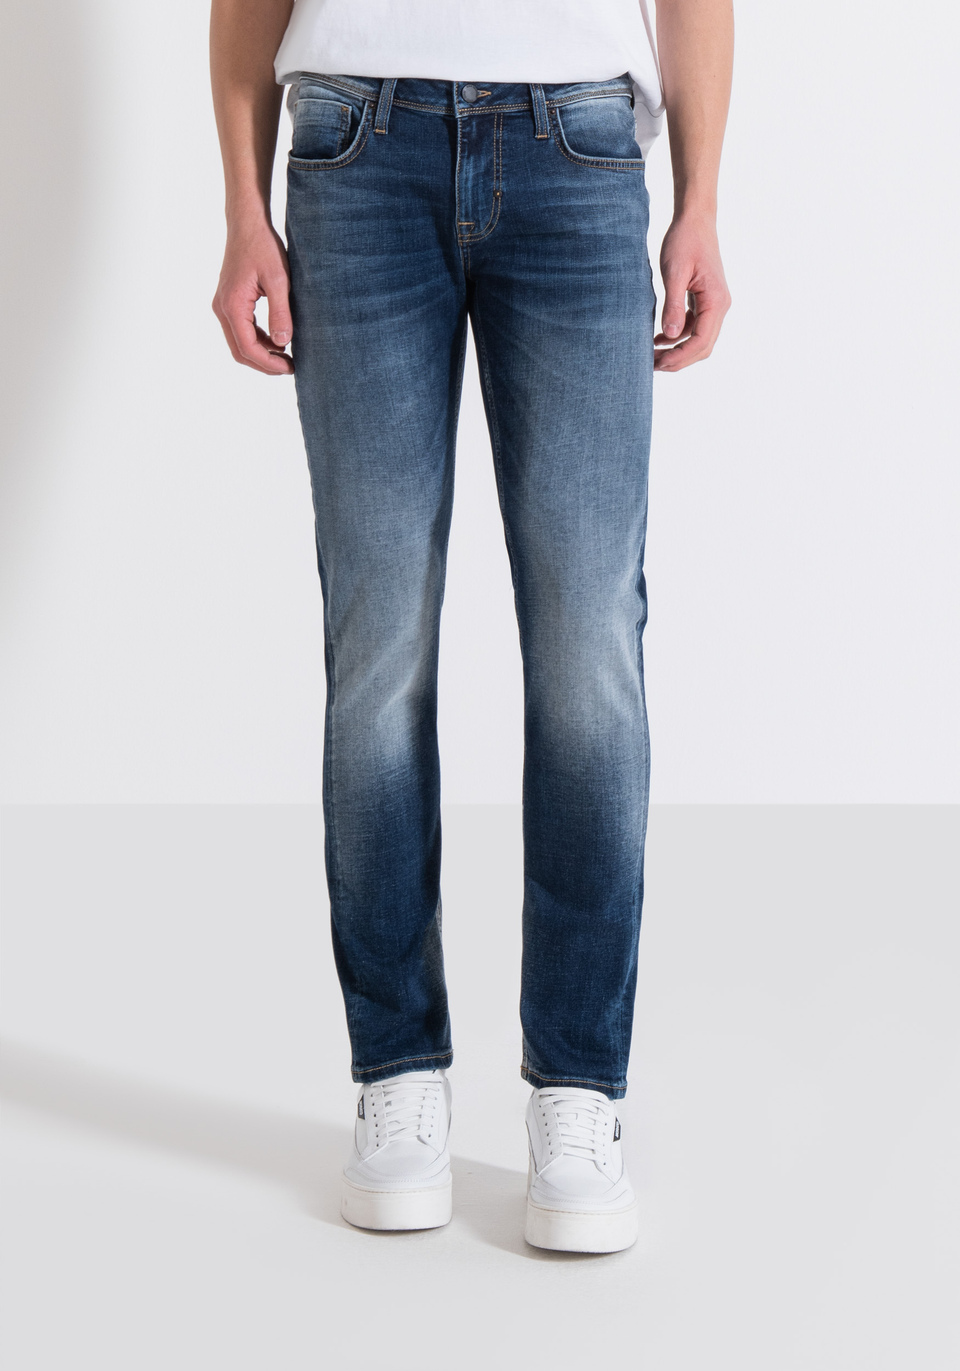 JEANS TAPERED FIT „OZZY“ AUS STRETCH-DENIM DUNKLE WASCHUNG - Antony Morato Online Shop